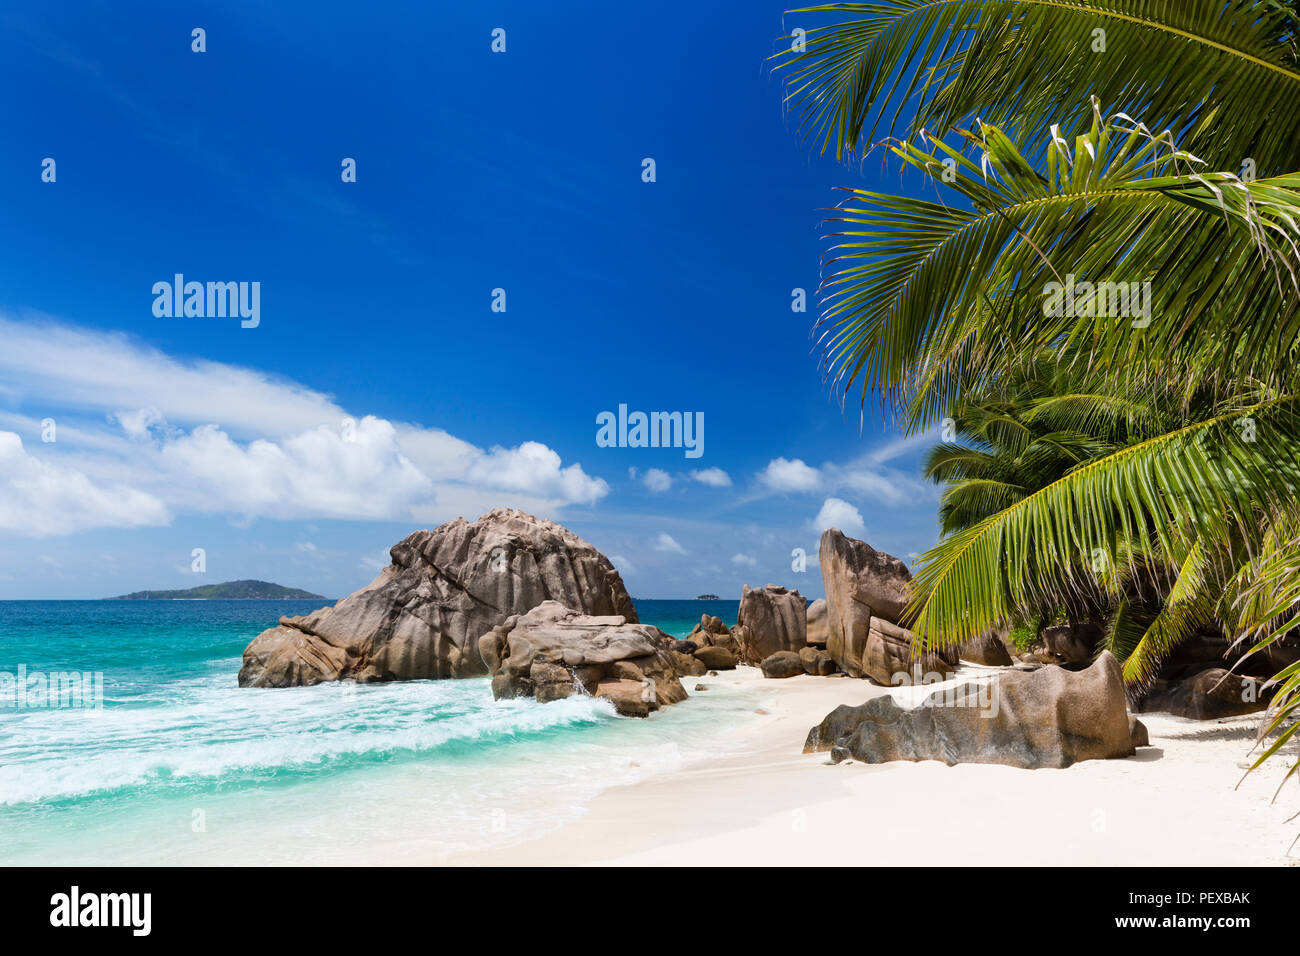 The beautiful tropical beach Anse Patates in La Digue, Seychelles with clear water, granite rocks and palm trees Stock Photo